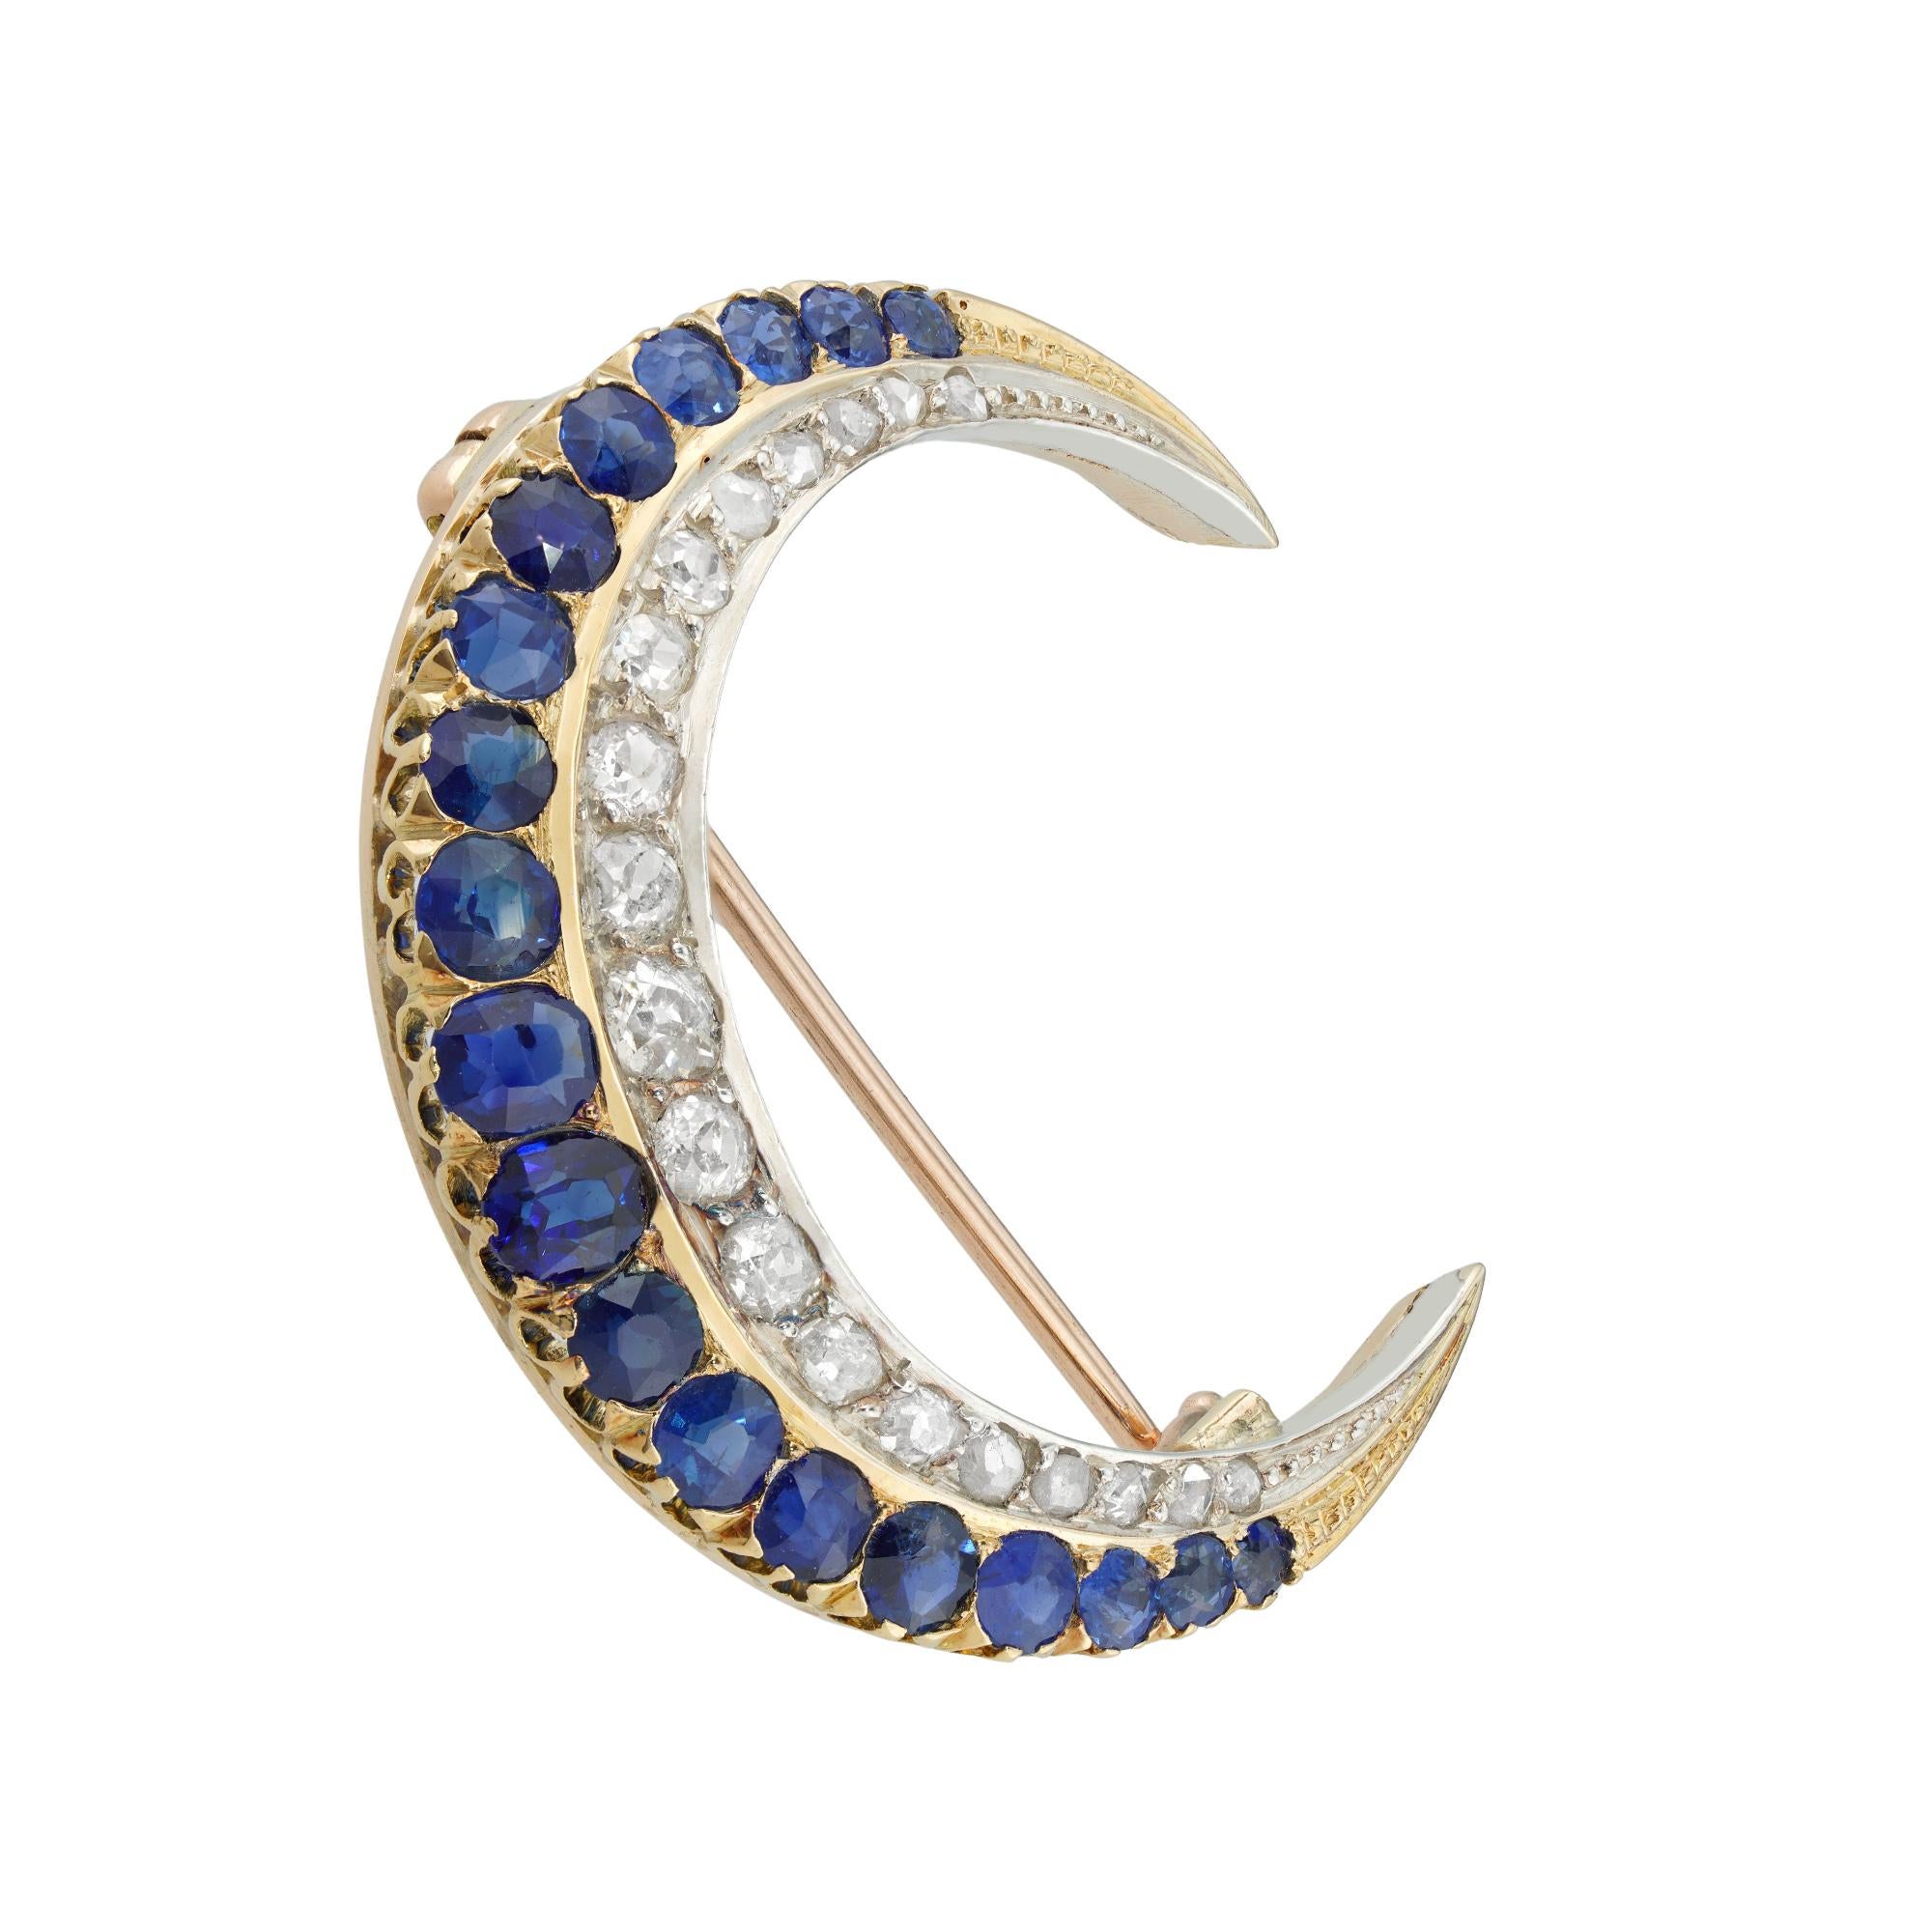 A Victorian sapphire and diamond crescent brooch, consisting of a row formed by nineteen faceted sapphires graduating in size from the centre and estimated to weigh approximately 2 carats in total, and a row of old European and rose-cut diamonds